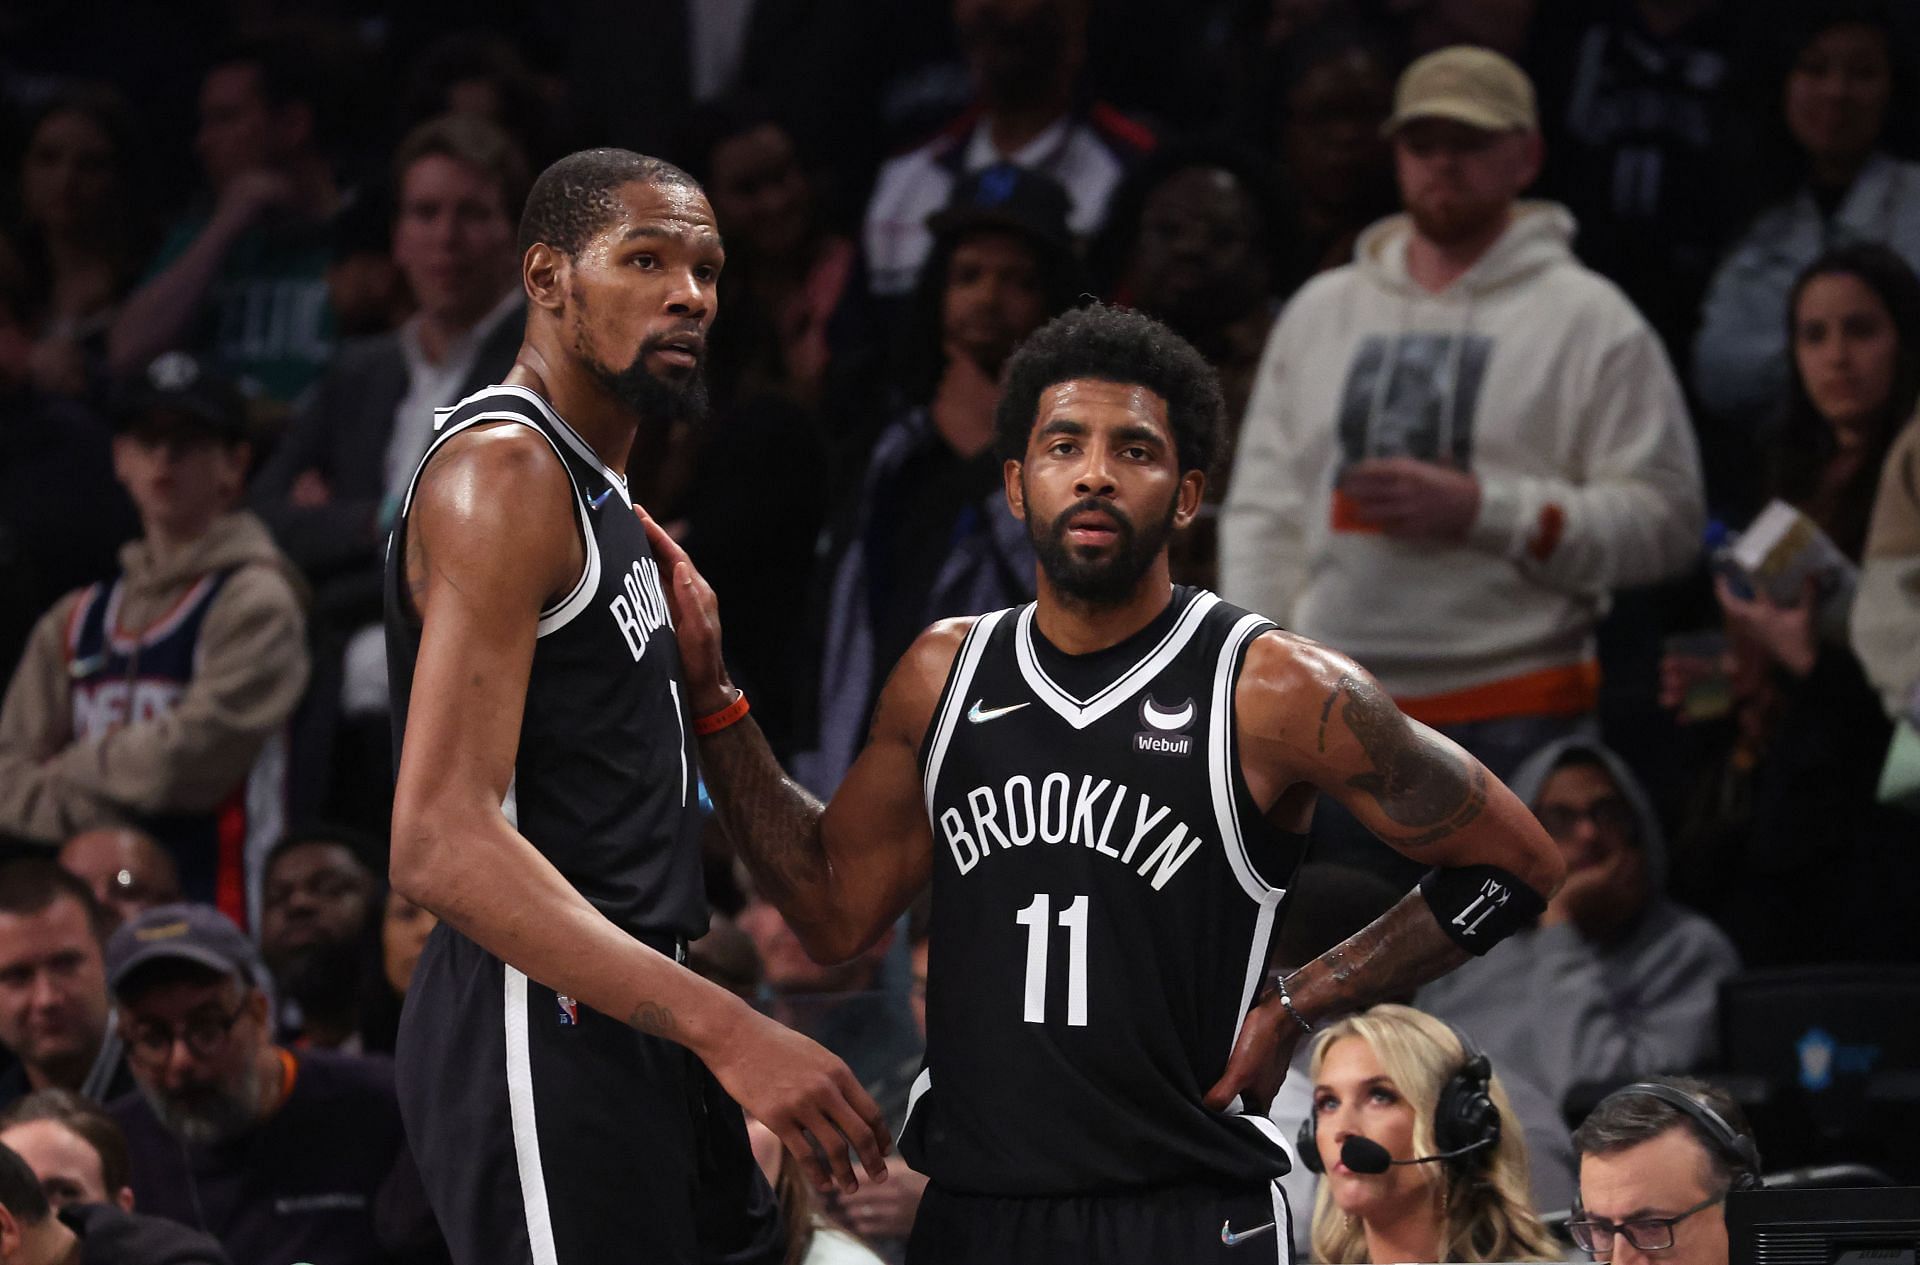 Durant and Irving of the Nets look on in the final seconds of their loss against the Celtics during Game 3.